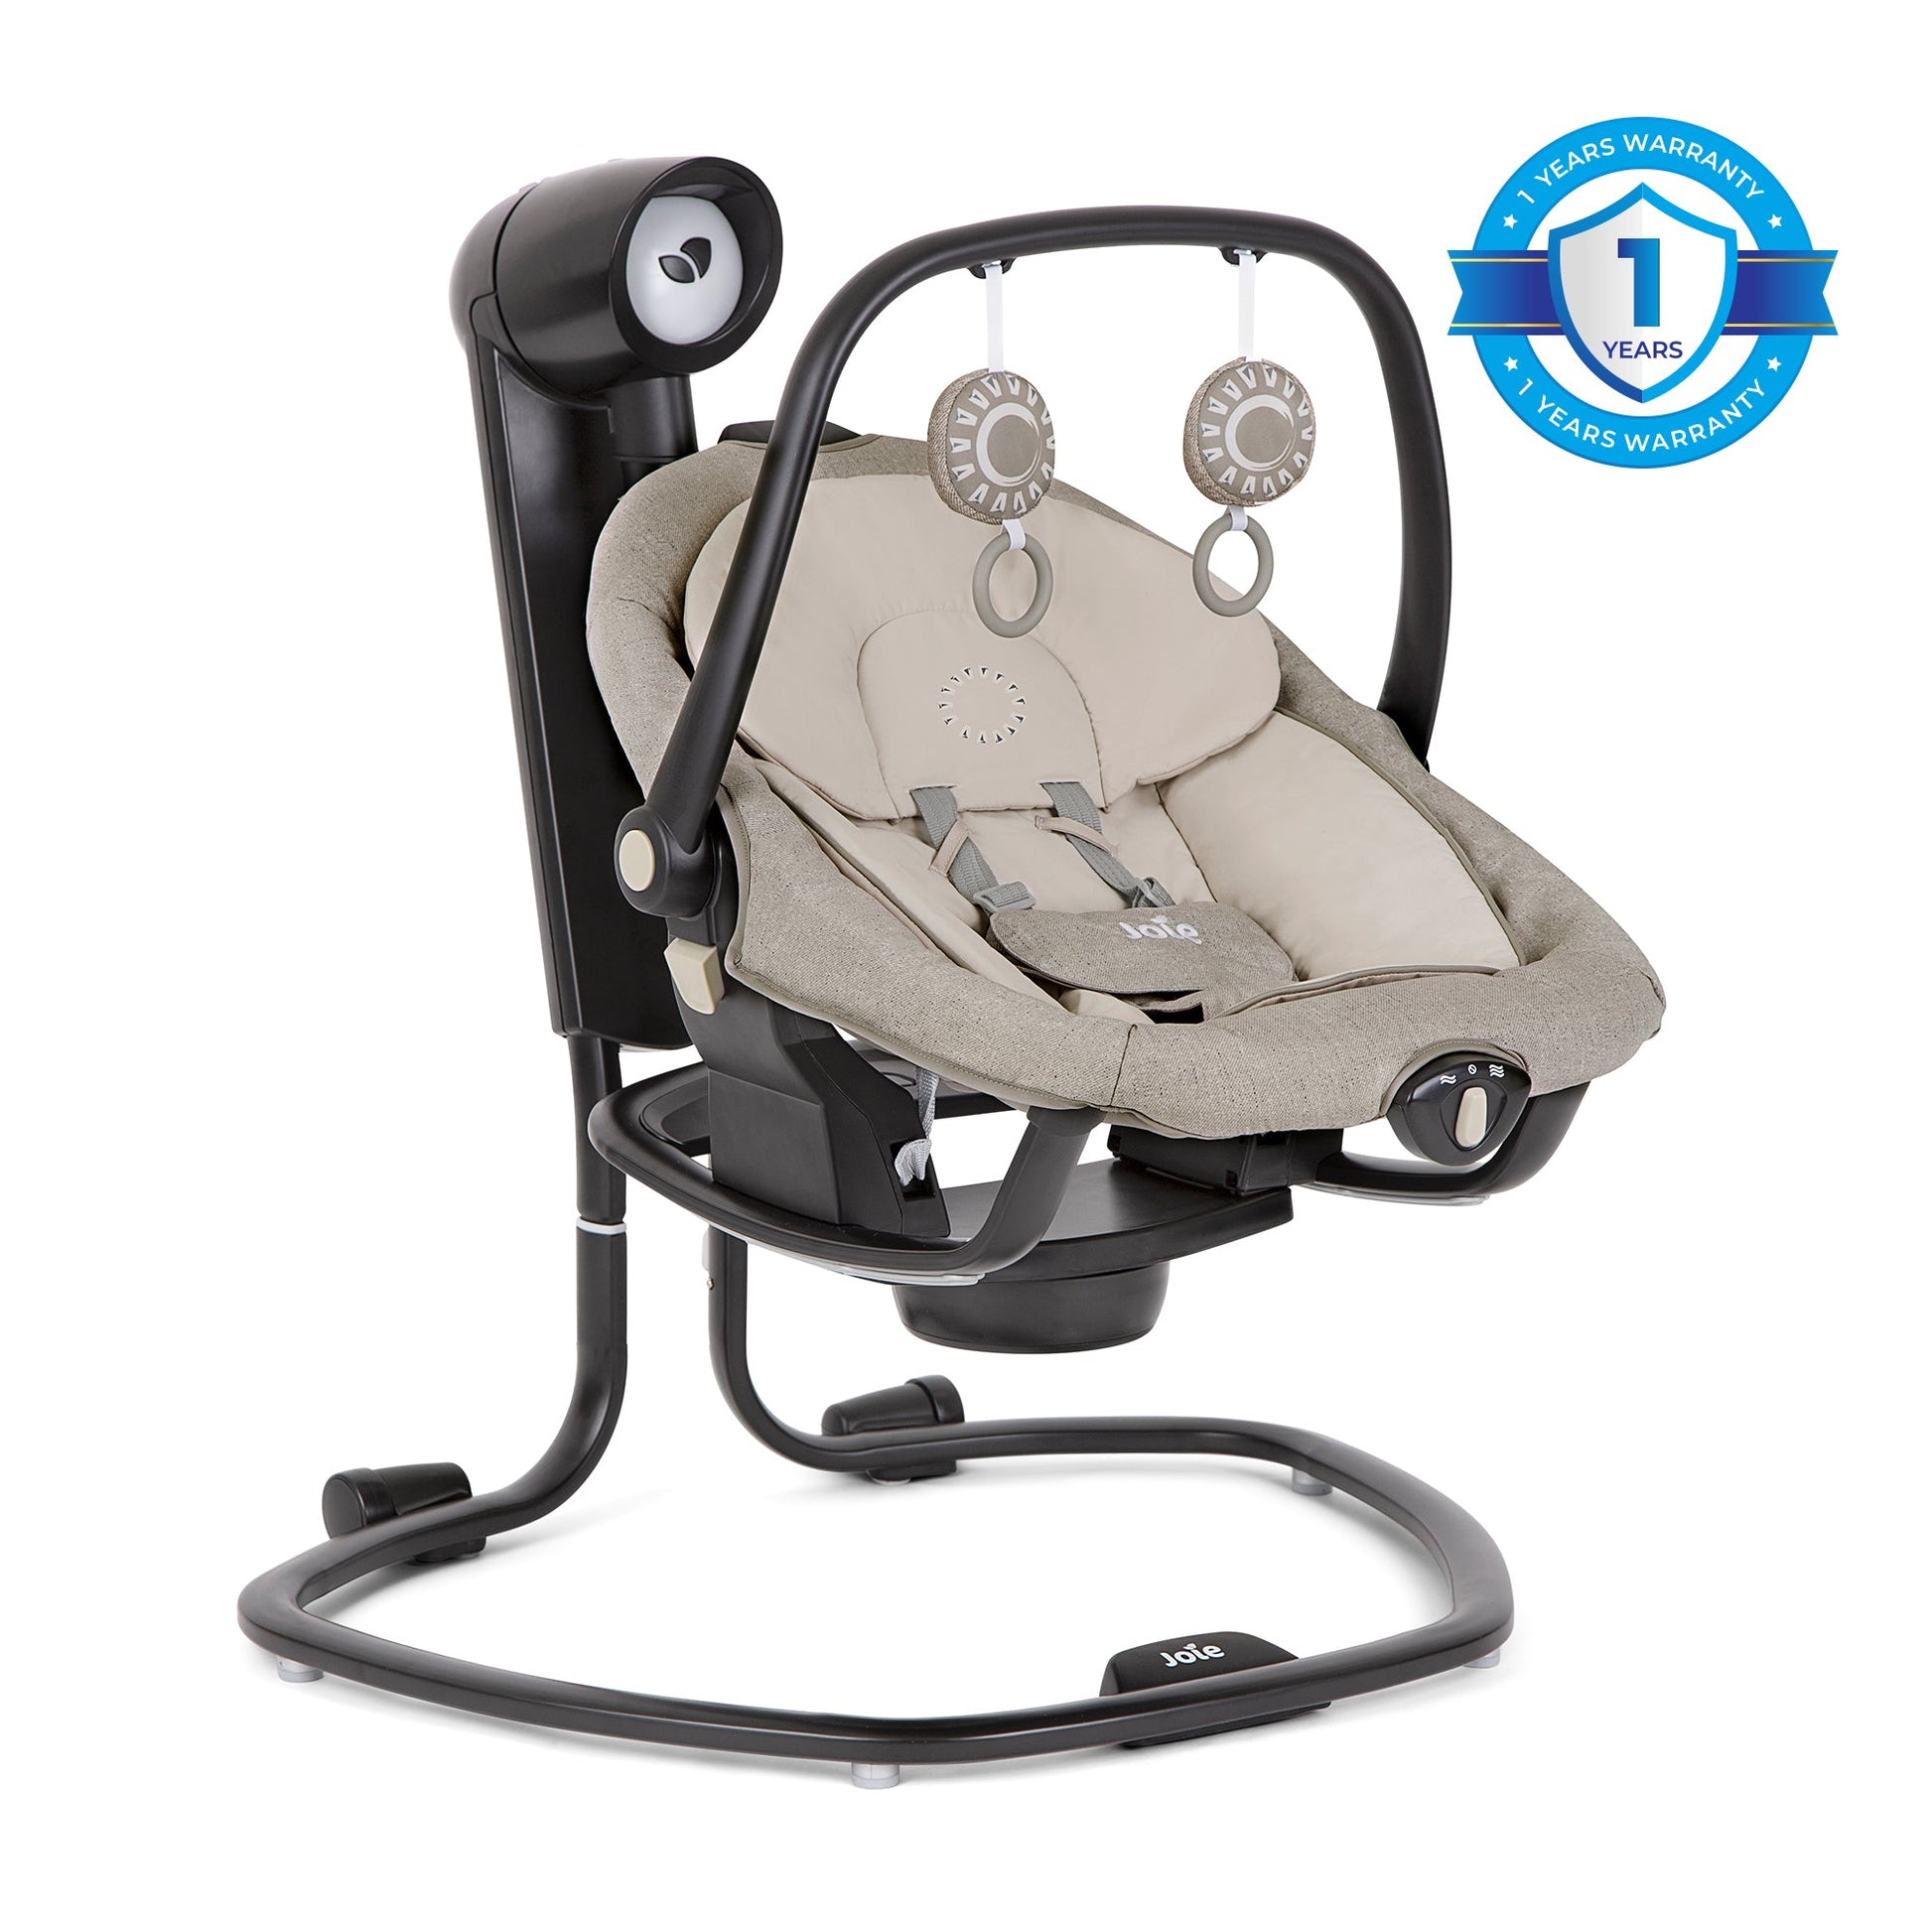 Joie Serina 2in1 Swing || Fashion-Speckled || Birth+ to 9months - Toys4All.in